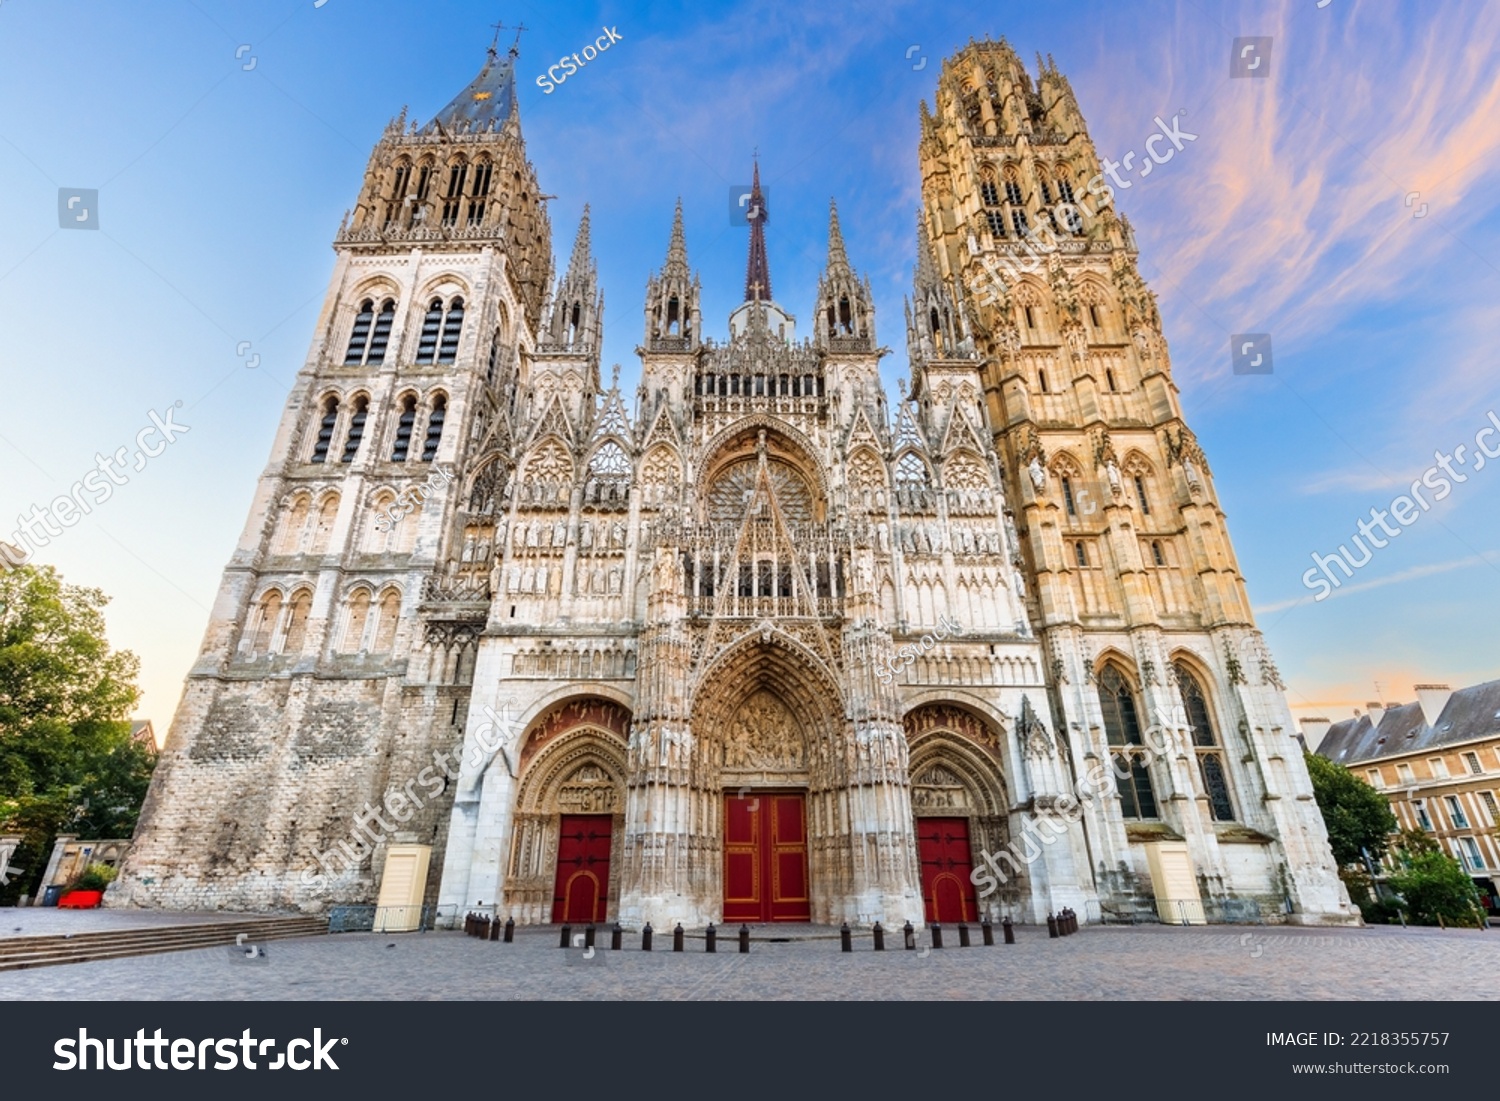 Rouen, Normandy, France. The west front of the Rouen Cathedral famous for its towers. #2218355757